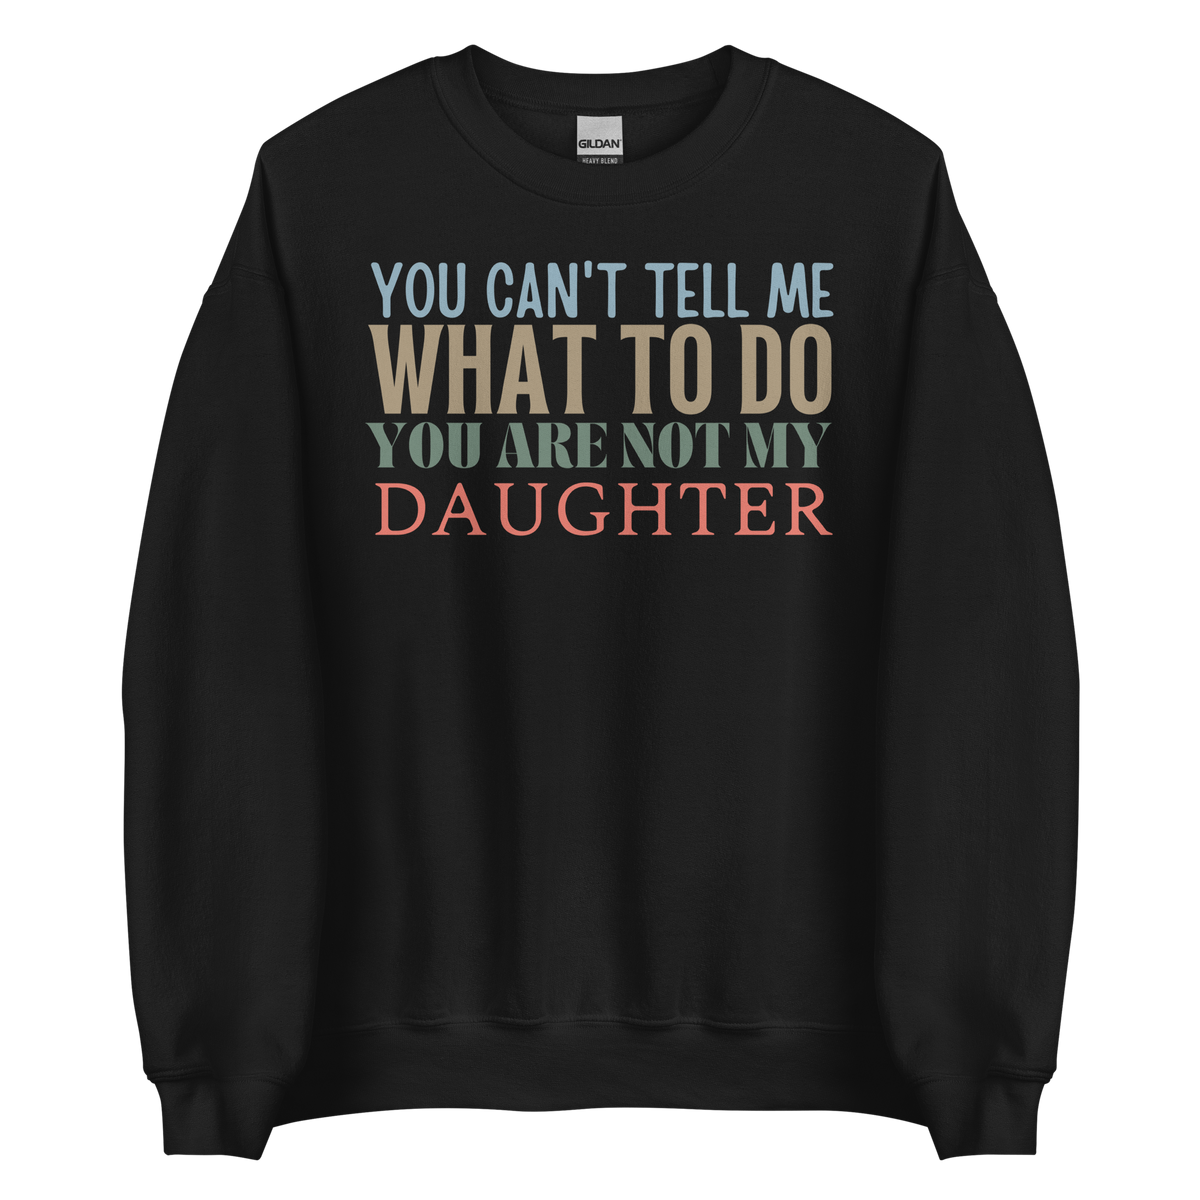 Dad sweatshirt, fathers day shirt, funny mens shirt, sweatshirt, gift for him, gift for her, funny mom tee, funny dad tee, new papa shirt, father sweatshirt, you can't tell me what to do you are not my daughter, new dad shirt